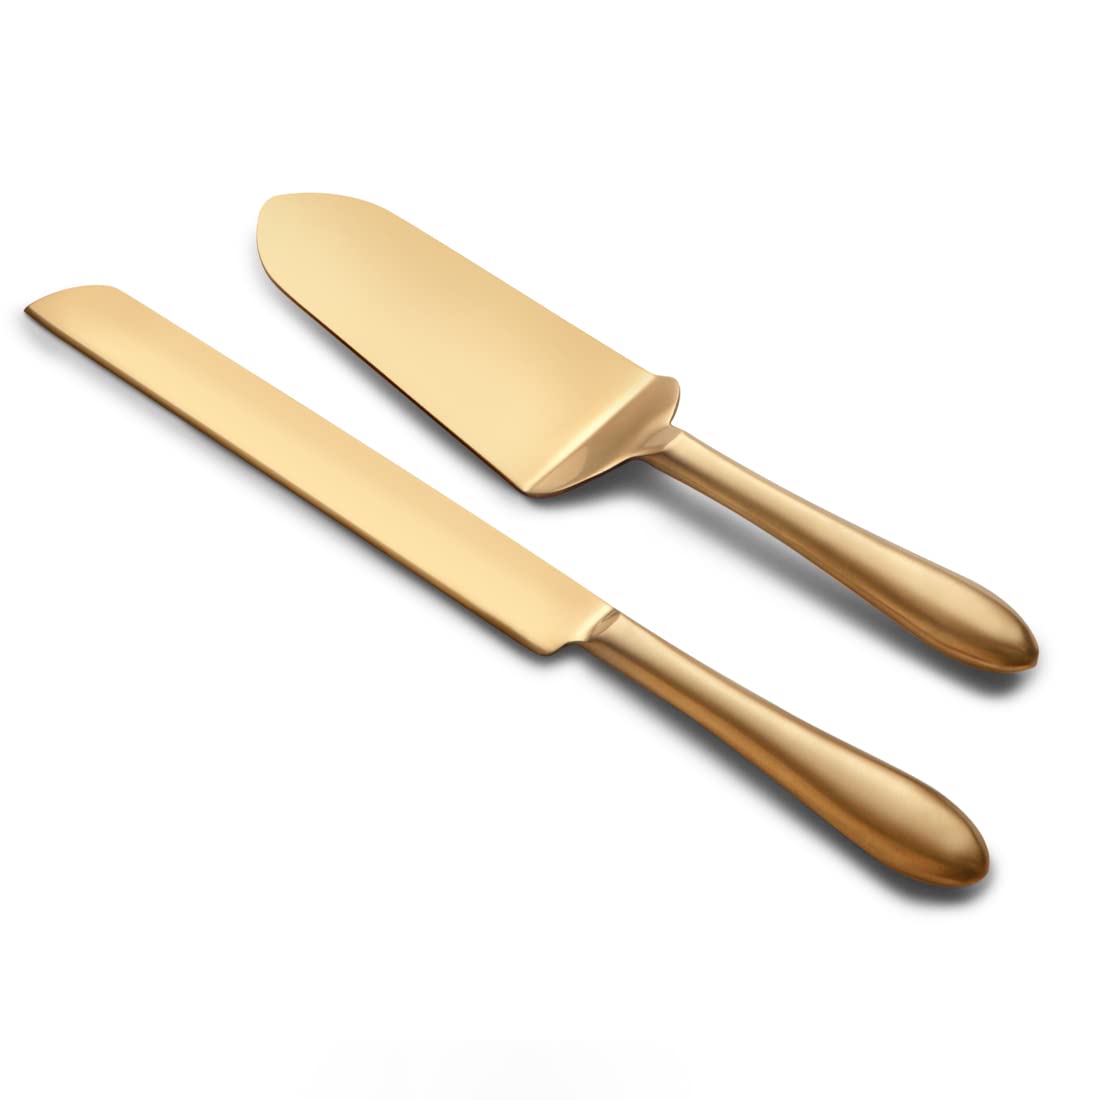 Cake Server and Cutting Knife Set Spatula and Cutting Knife Set of 2 Slicer Cutter Pizza Pie Dessert Server Stainless Steel with Brass Plating Gold